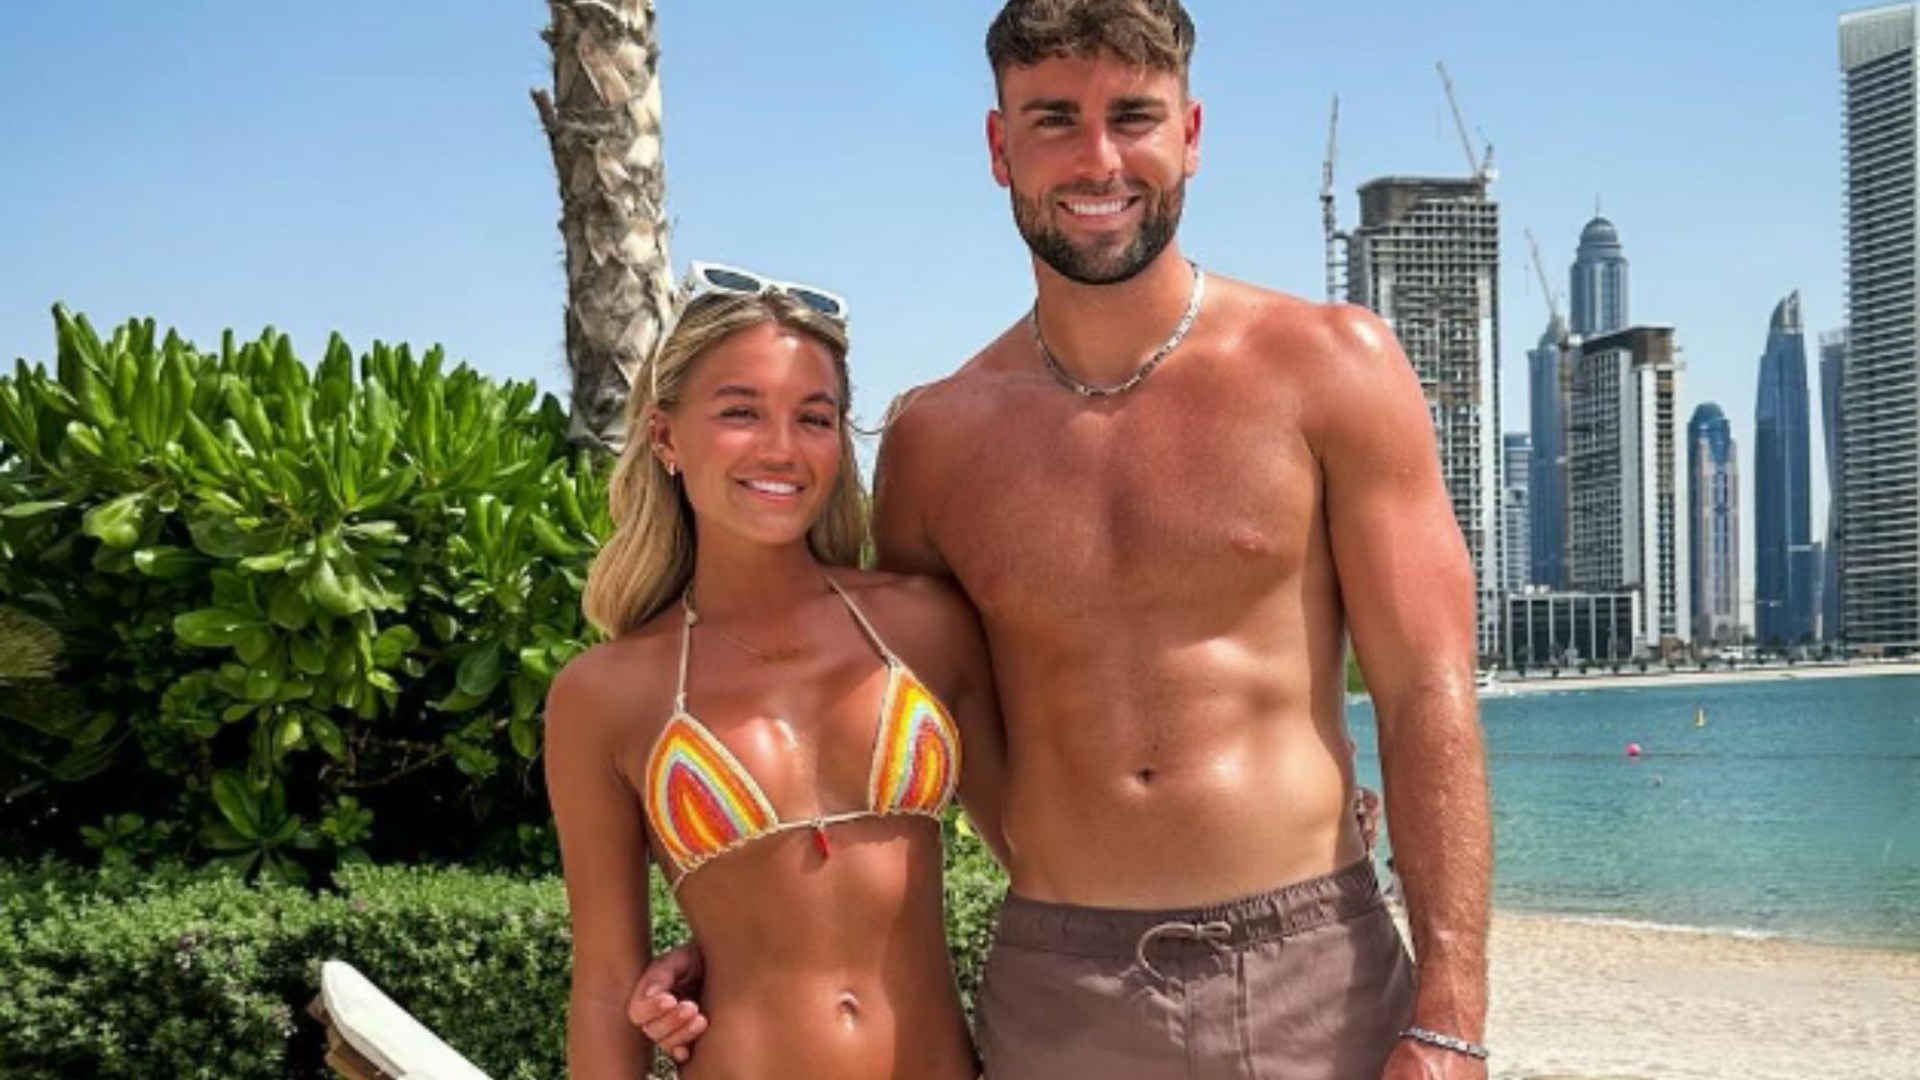 “Love Island Feud Reignited: Tom Clare Takes Swipe at Show Ex in Gushing Birthday Post to Molly Smith” – Exclusive Drama Unveiled!